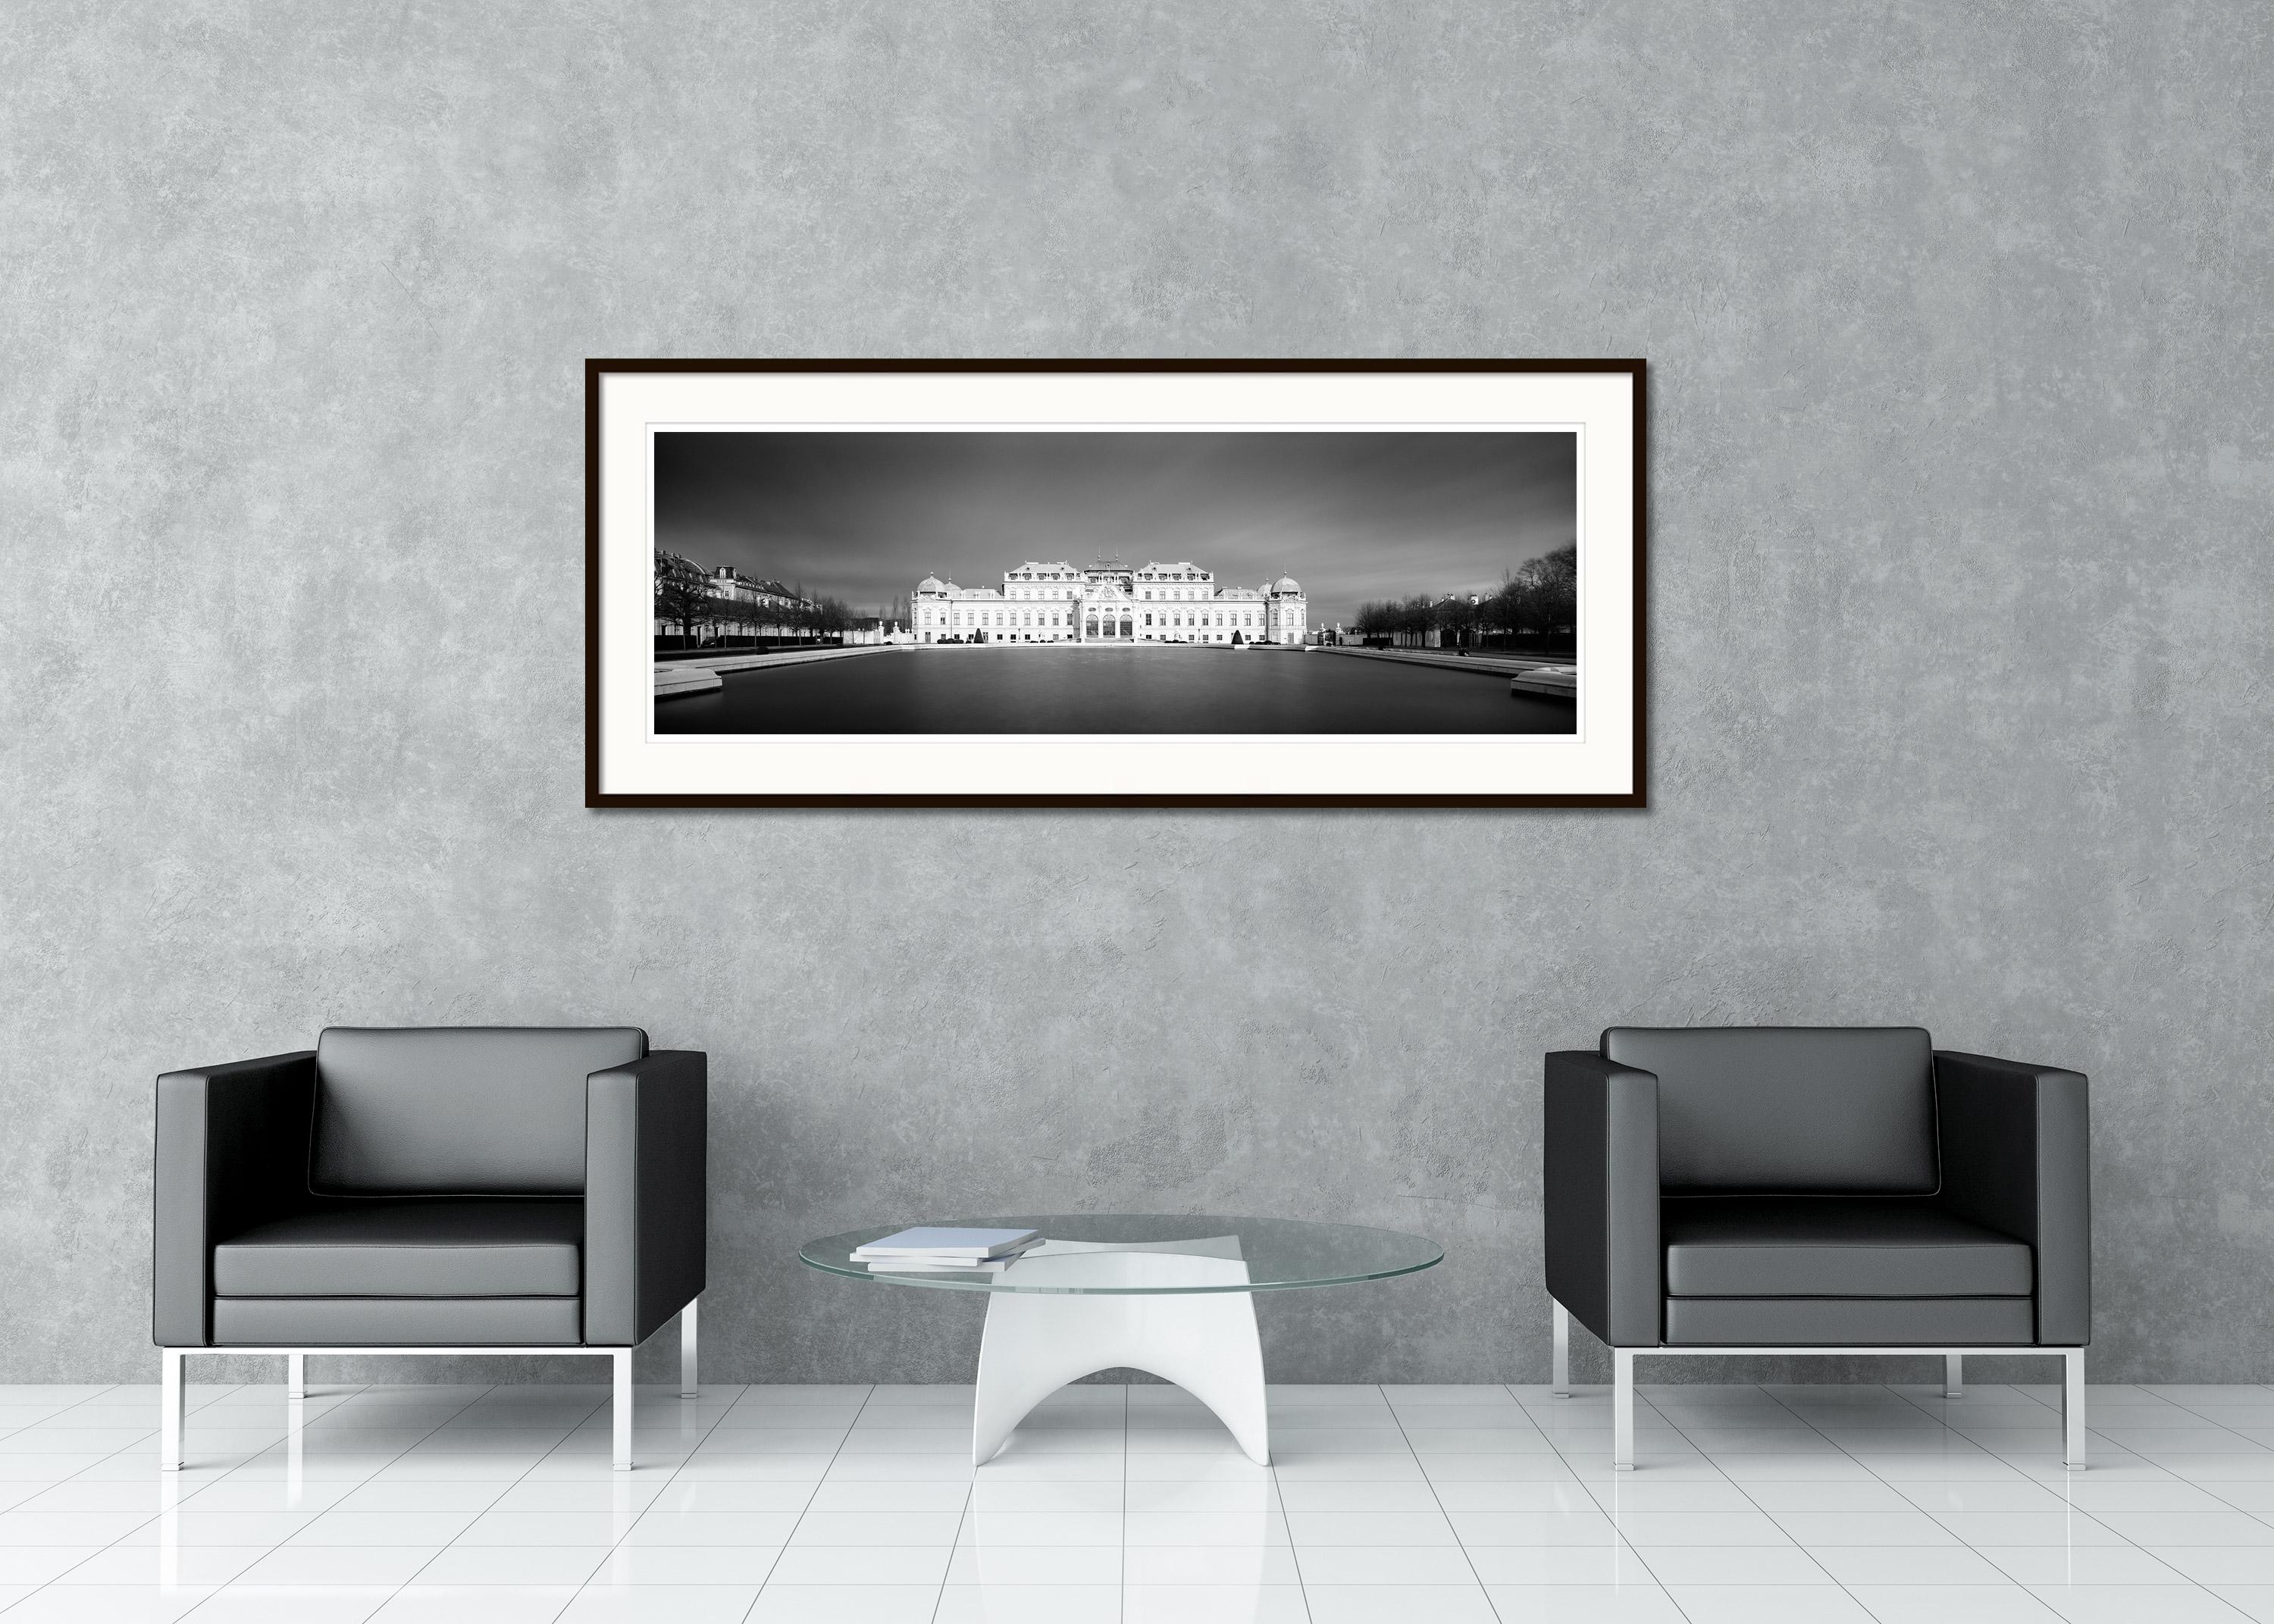 Black and White Fine Art panorama landscape - cityscape photography. Belvedere palace with water fountain during a storm with dark skies, Vienna, Austria. Archival pigment ink print, edition of 9. Signed, titled, dated and numbered by artist.